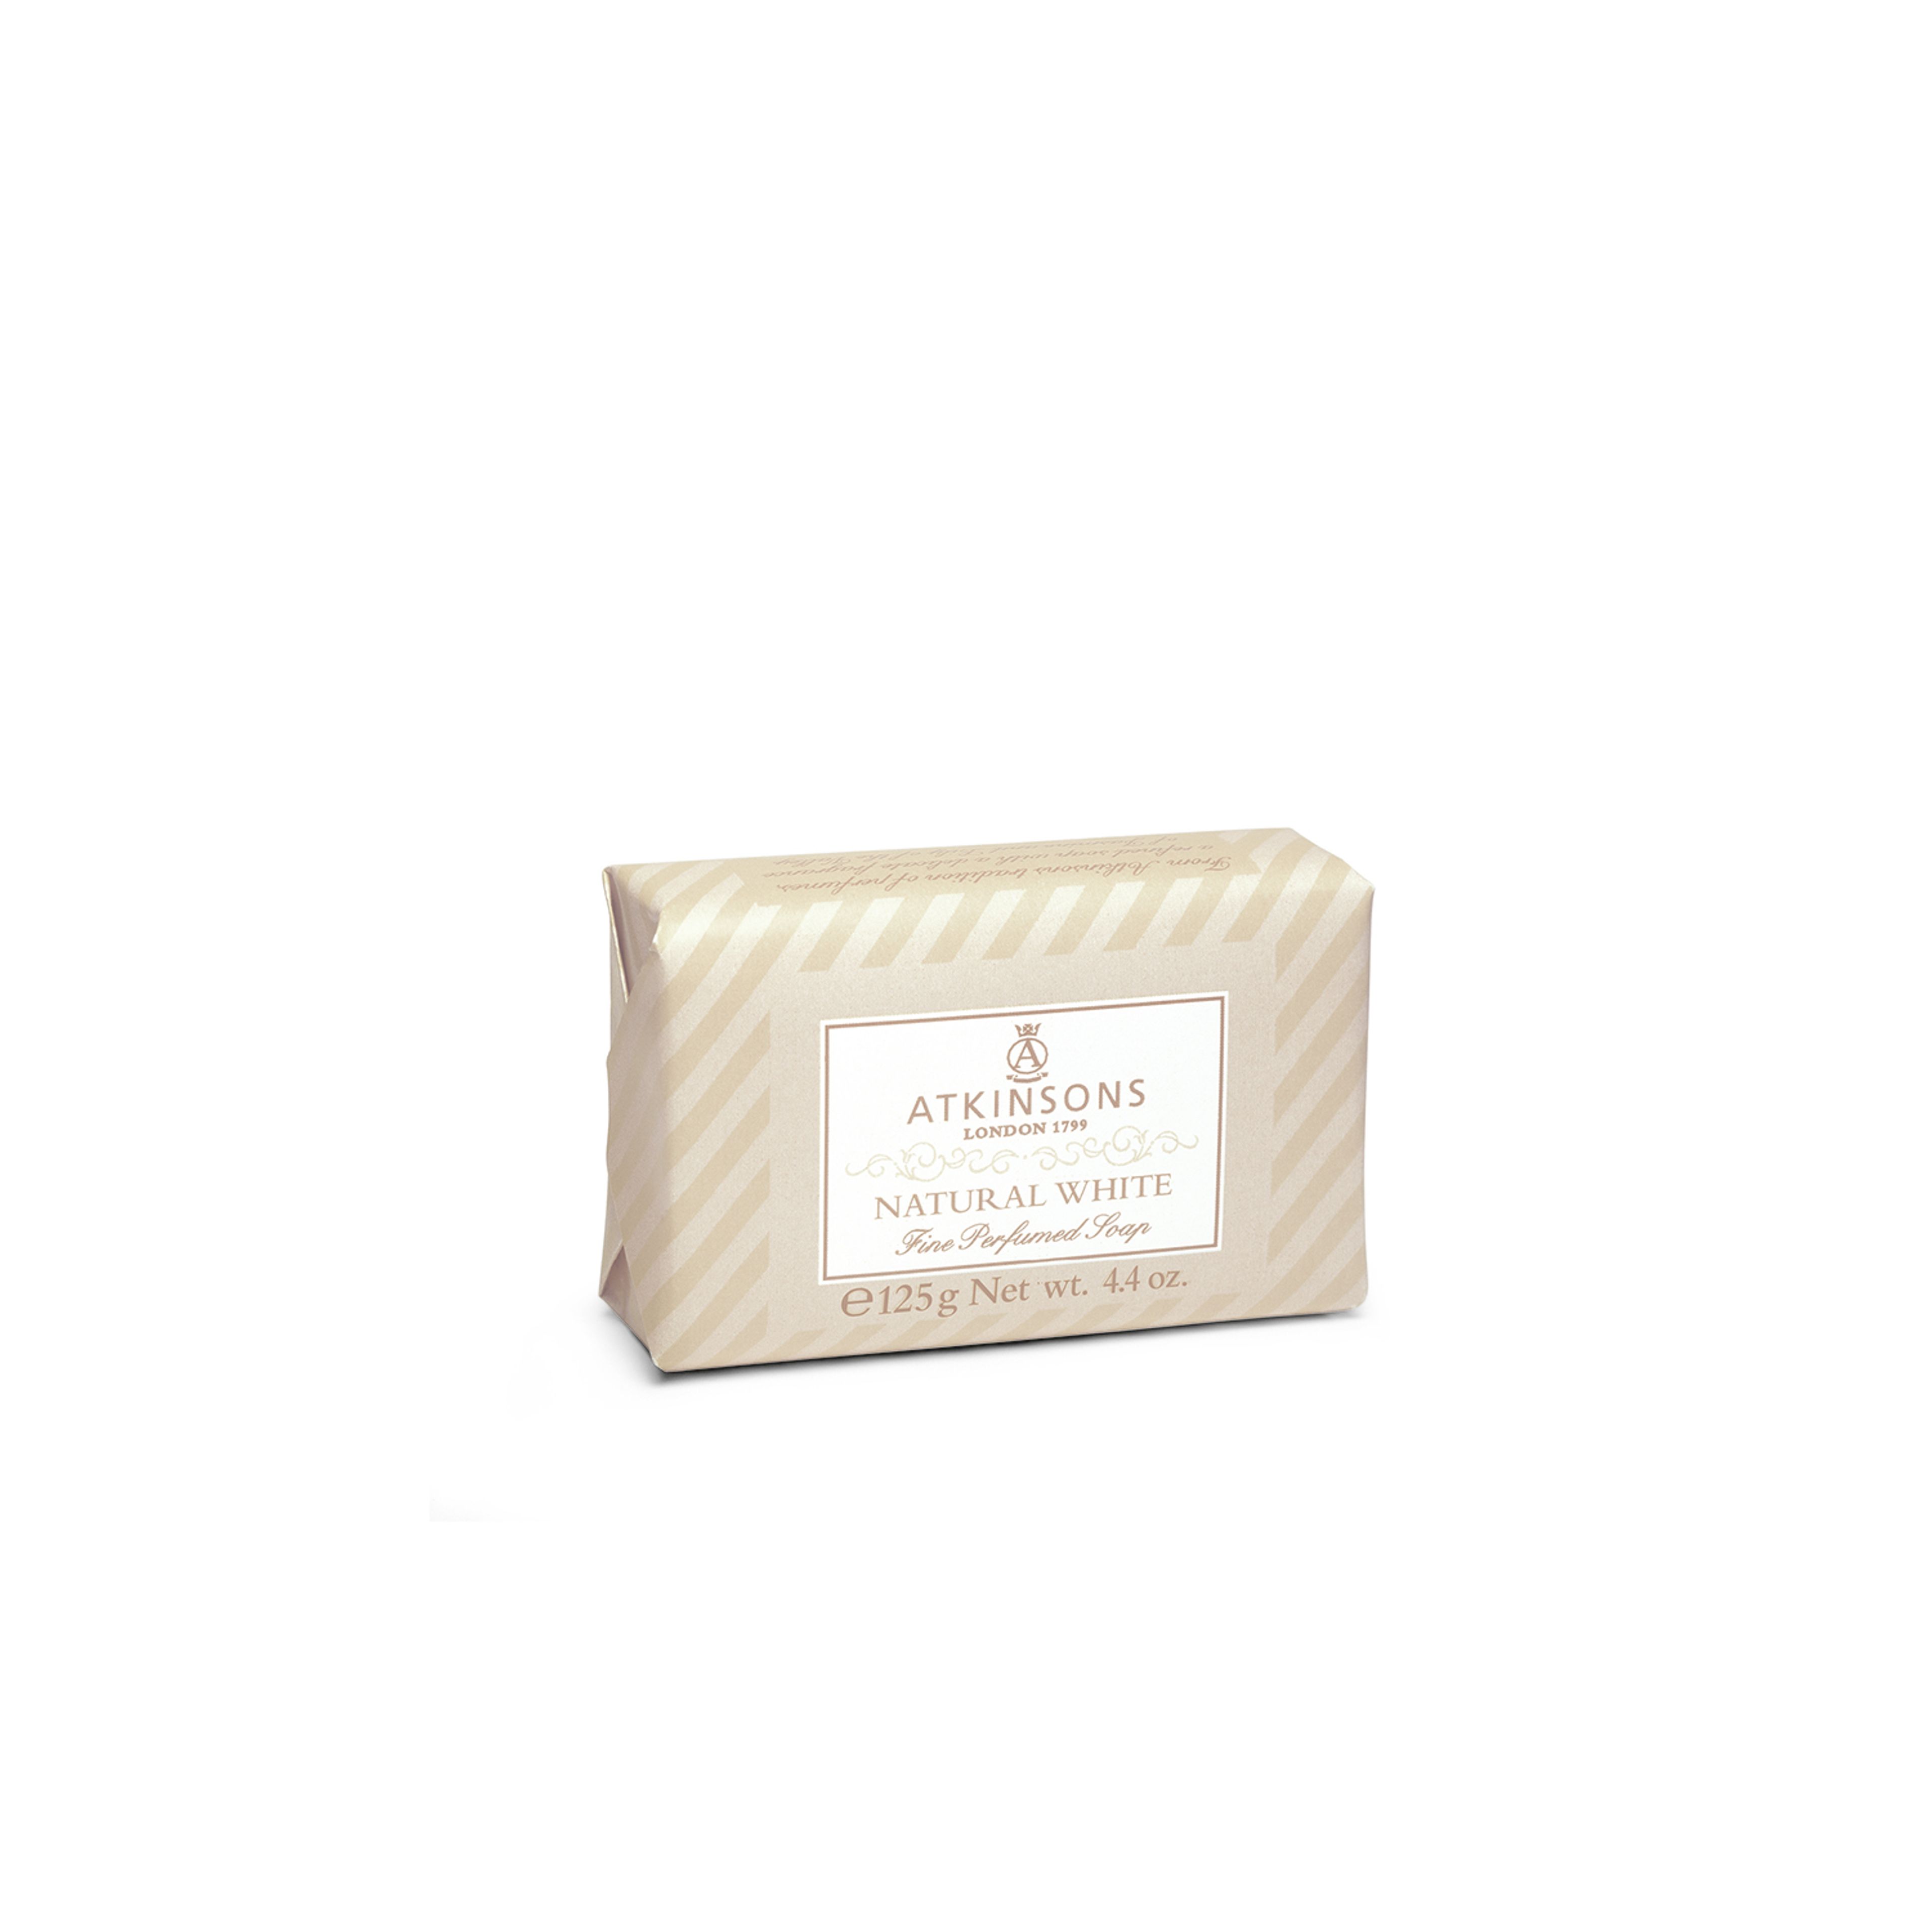 Atkinsons Fine Perfumed Soap-natural White 1